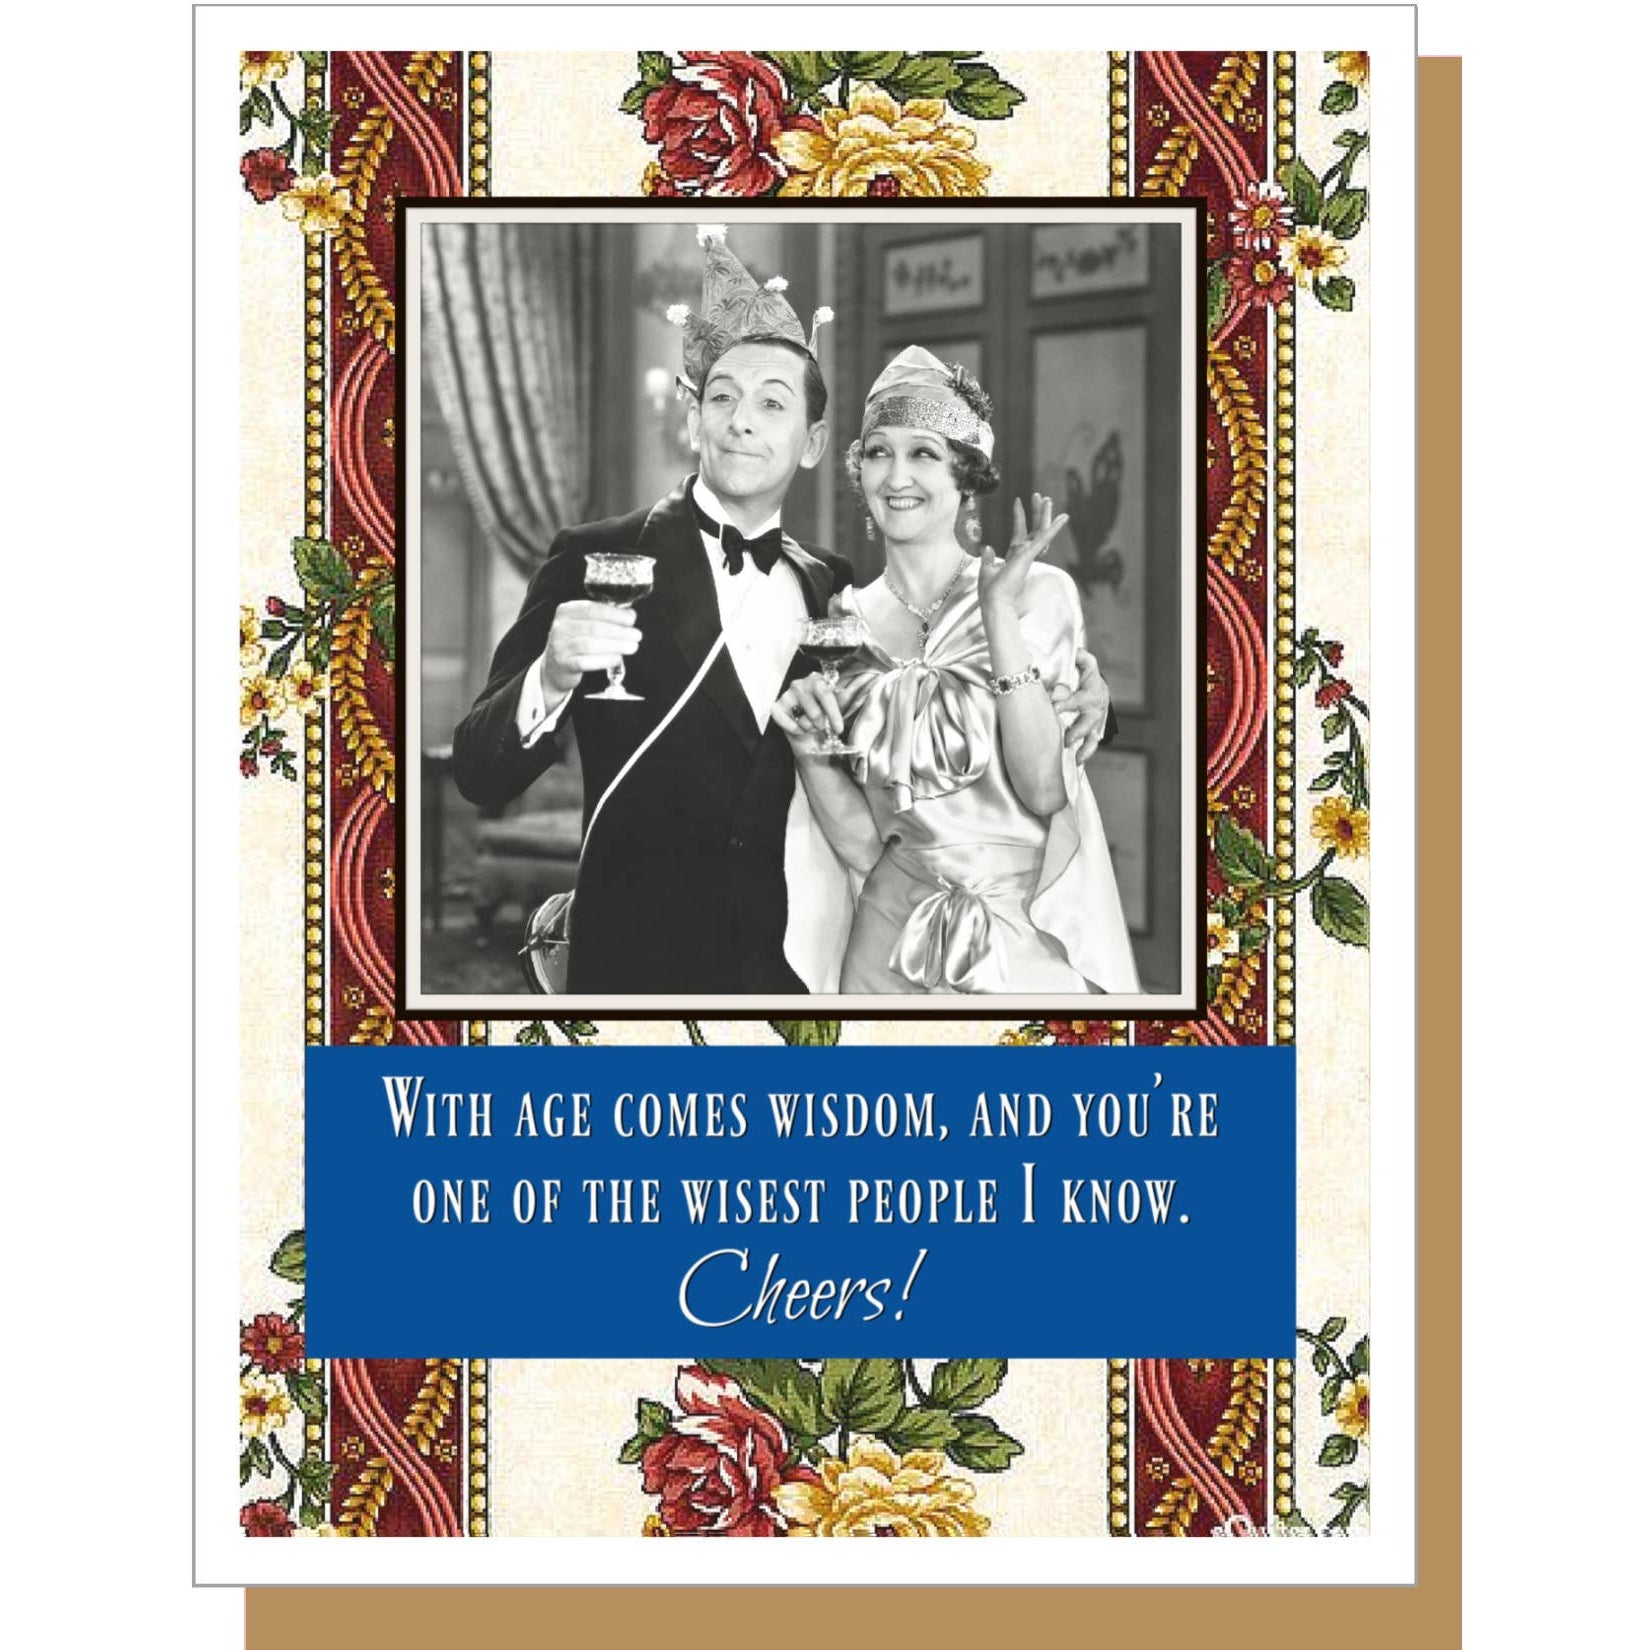 With Age Comes Wisdom Greeting Card